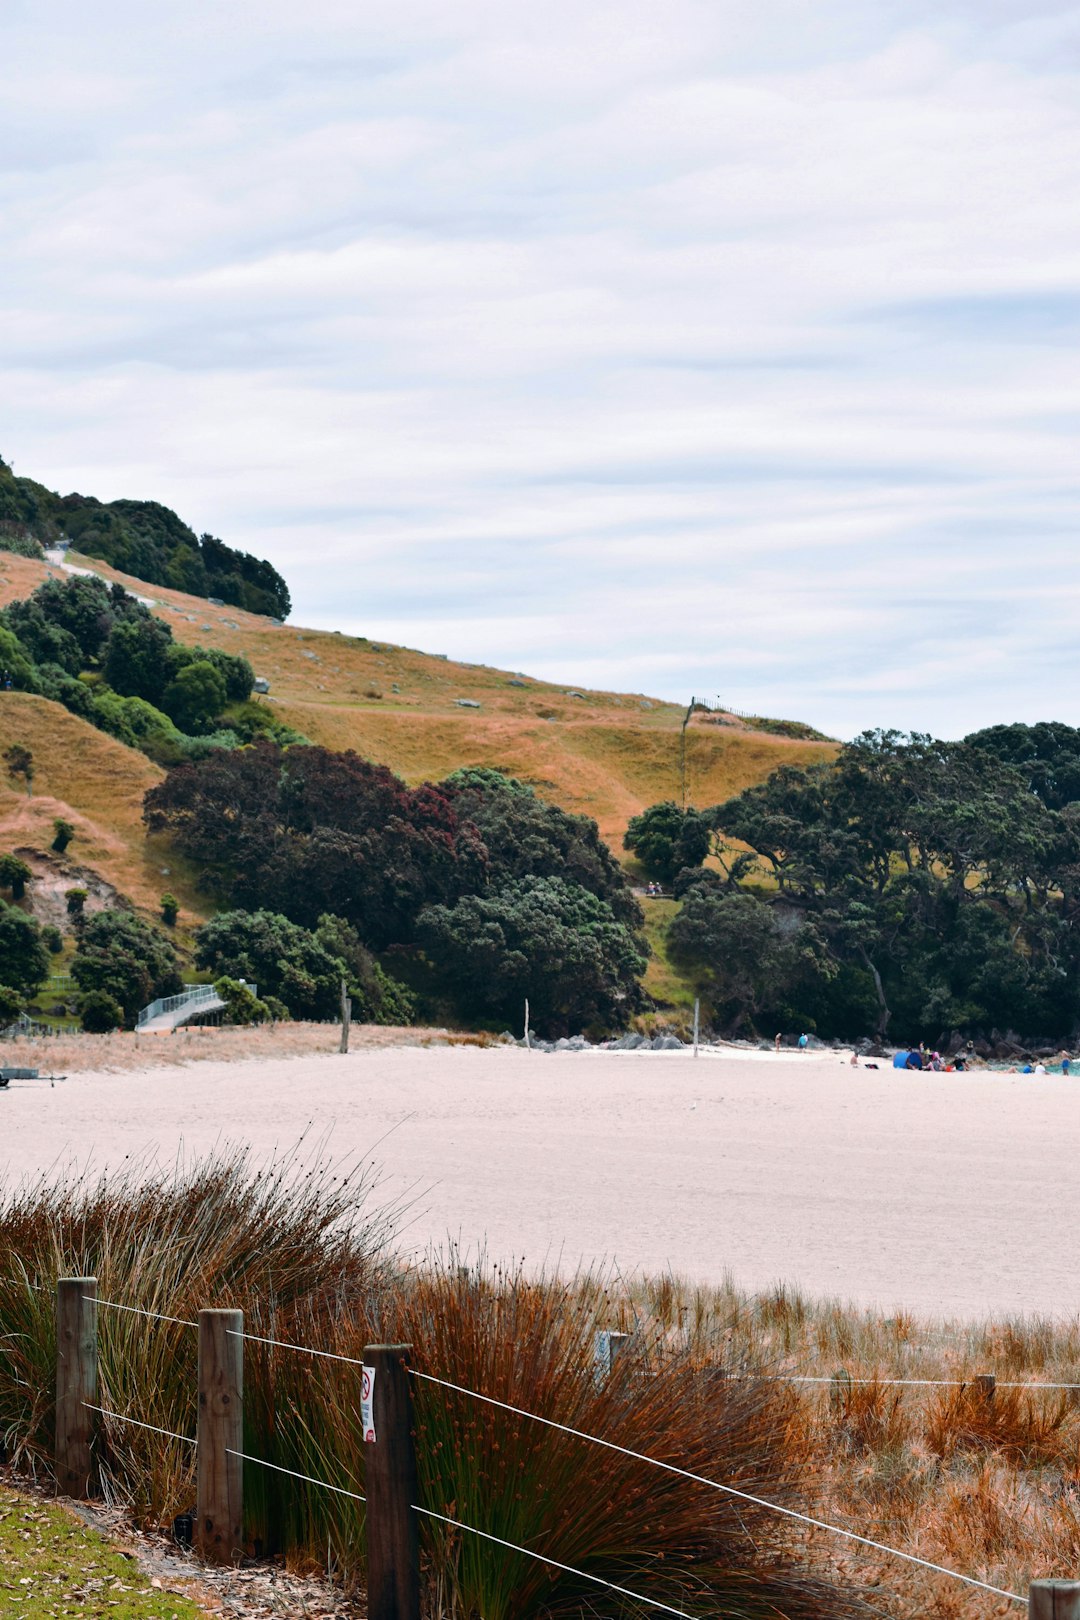 Travel Tips and Stories of Mount Maunganui in New Zealand